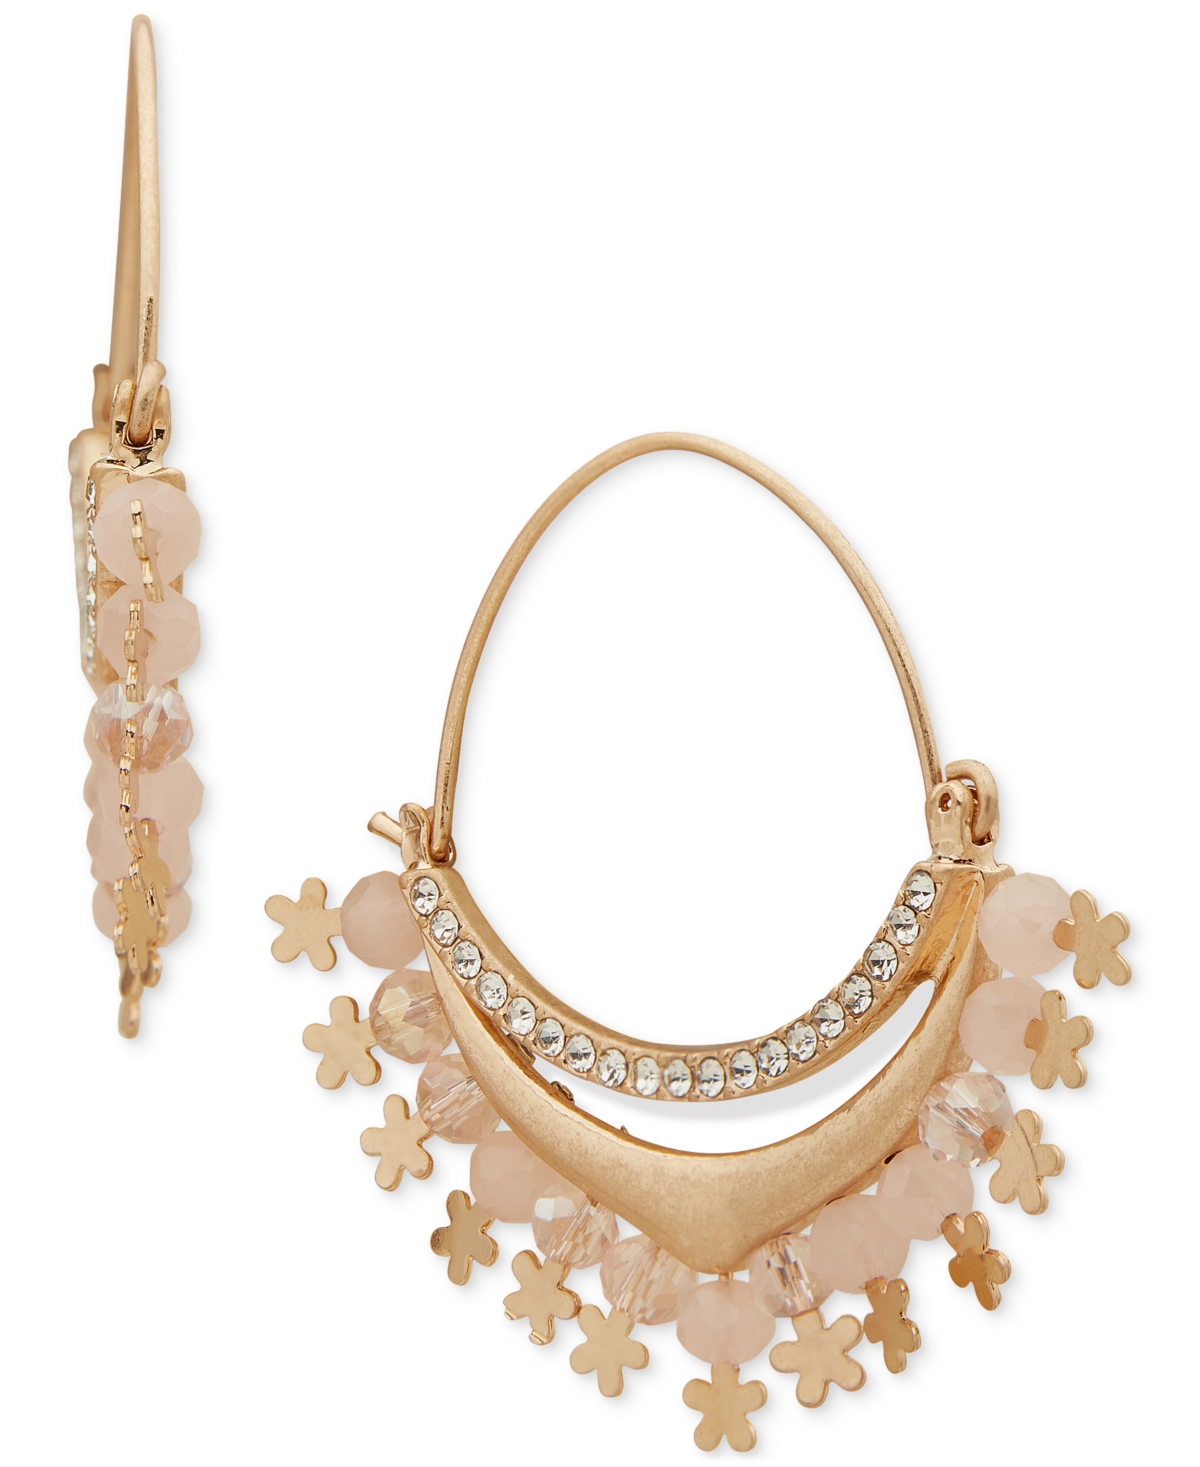 Gold-Tone Pave & Shaky Bead Statement Hoop Earrings - Blush